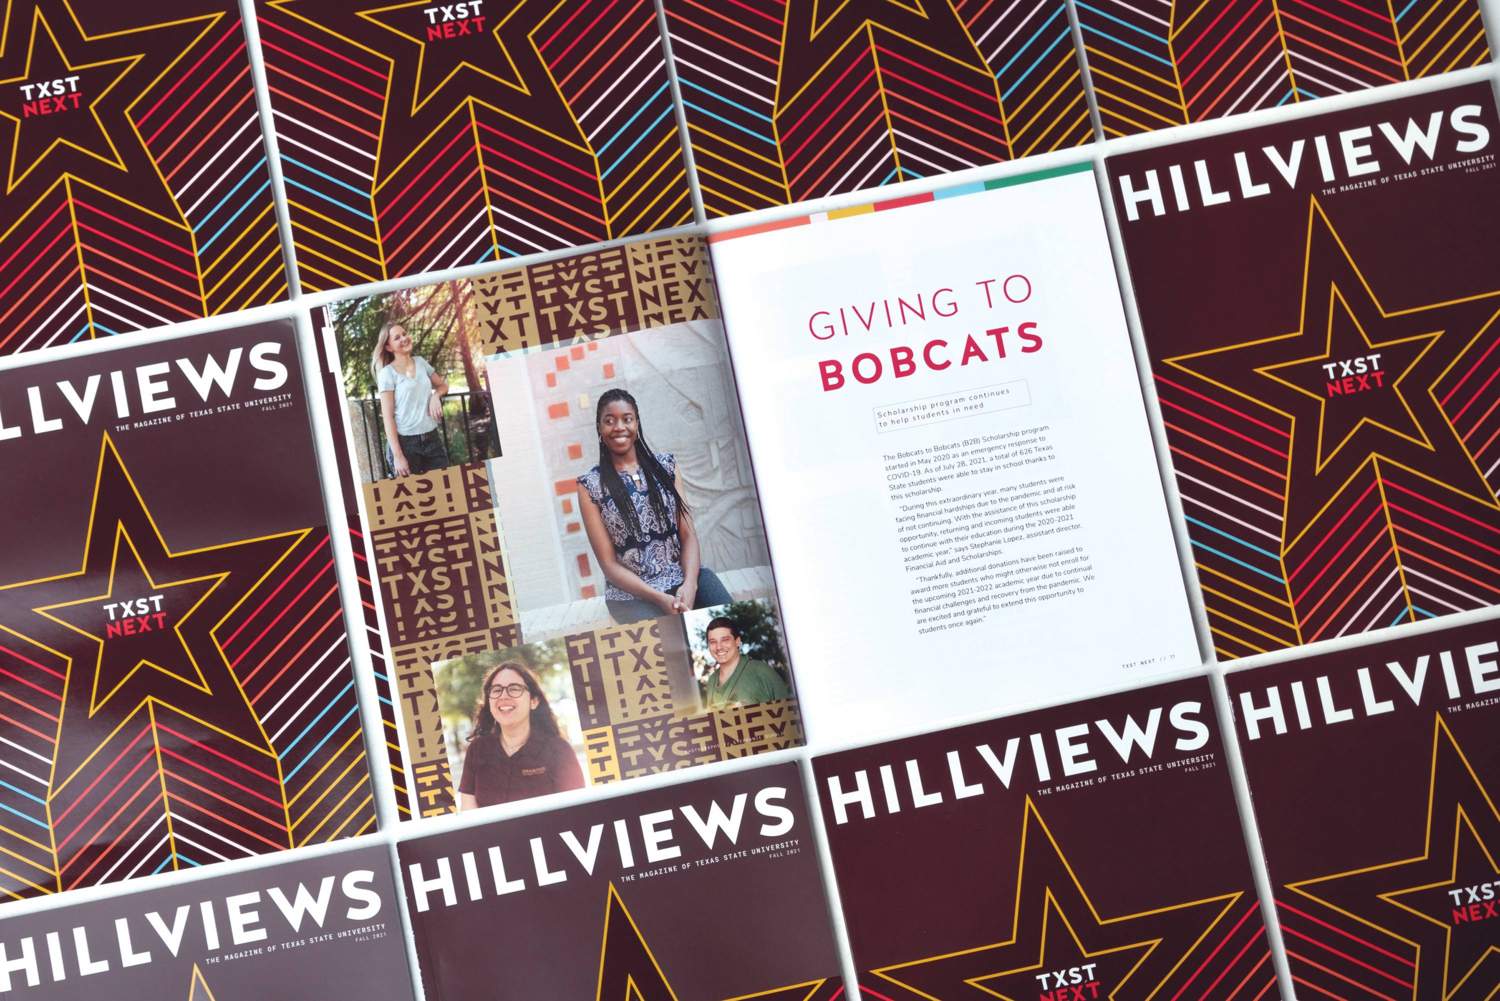 A Hillviews layout uses white space, sans serif fonts, prominent photography, and bright colors to achieve a clean, modern look.